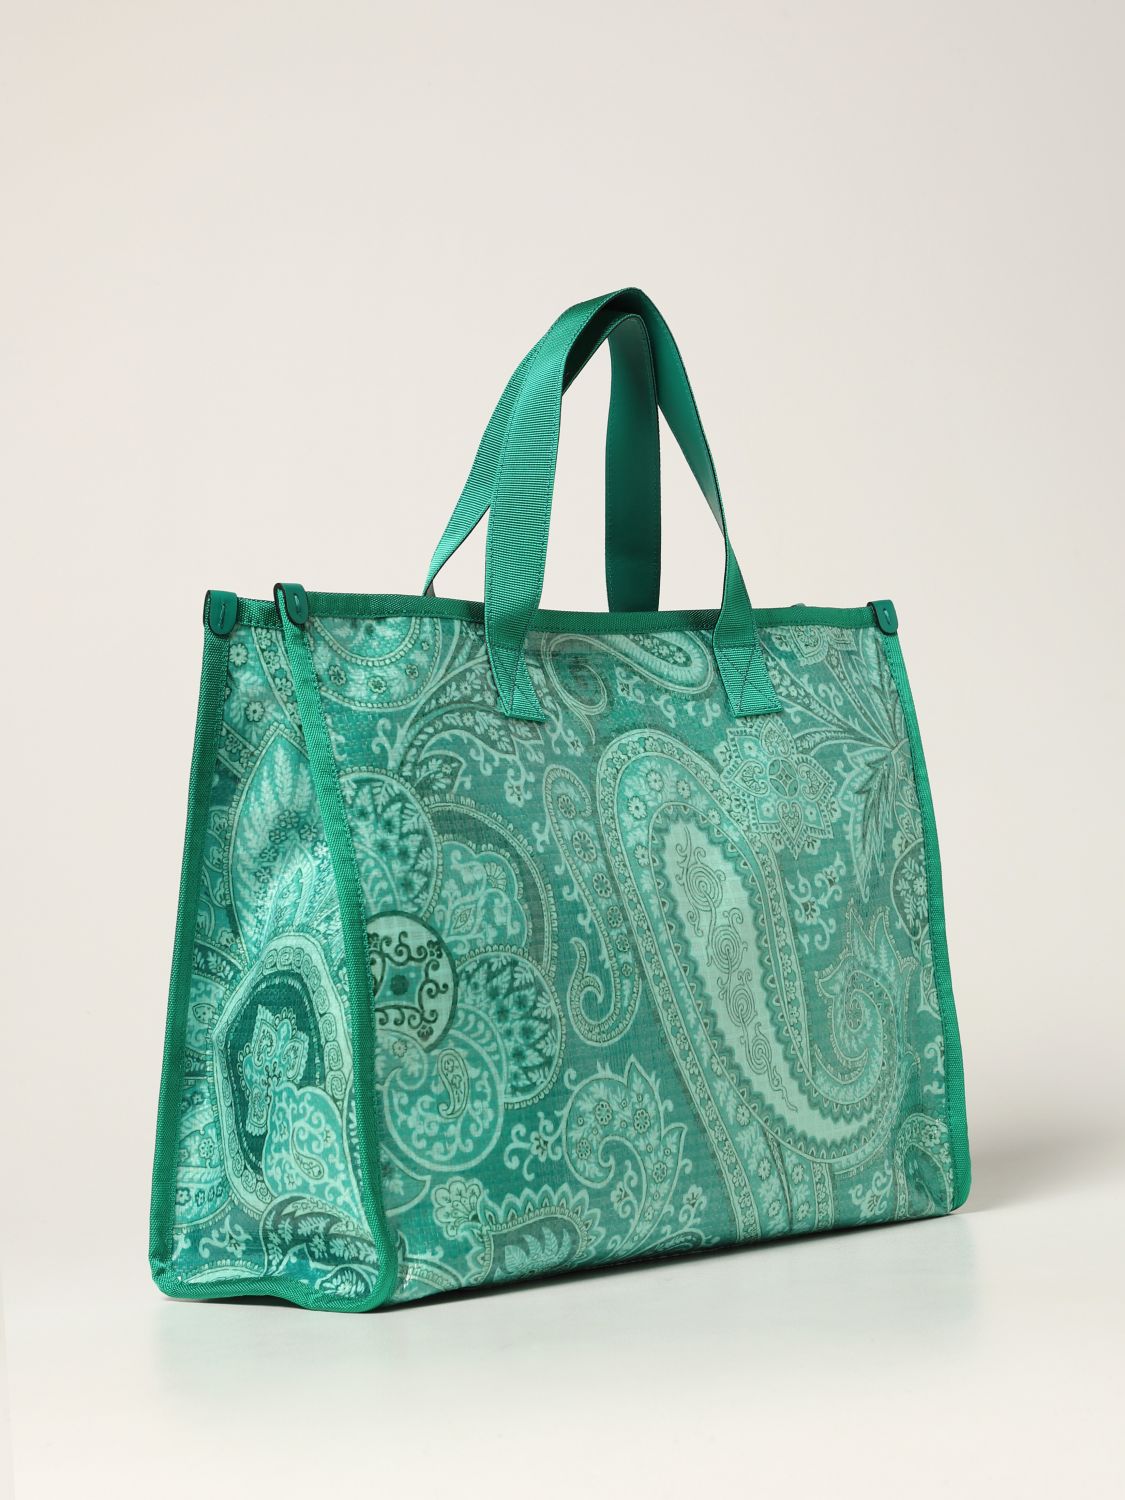 Etro Bag Tote Paisley Shopper Green Ages 2010